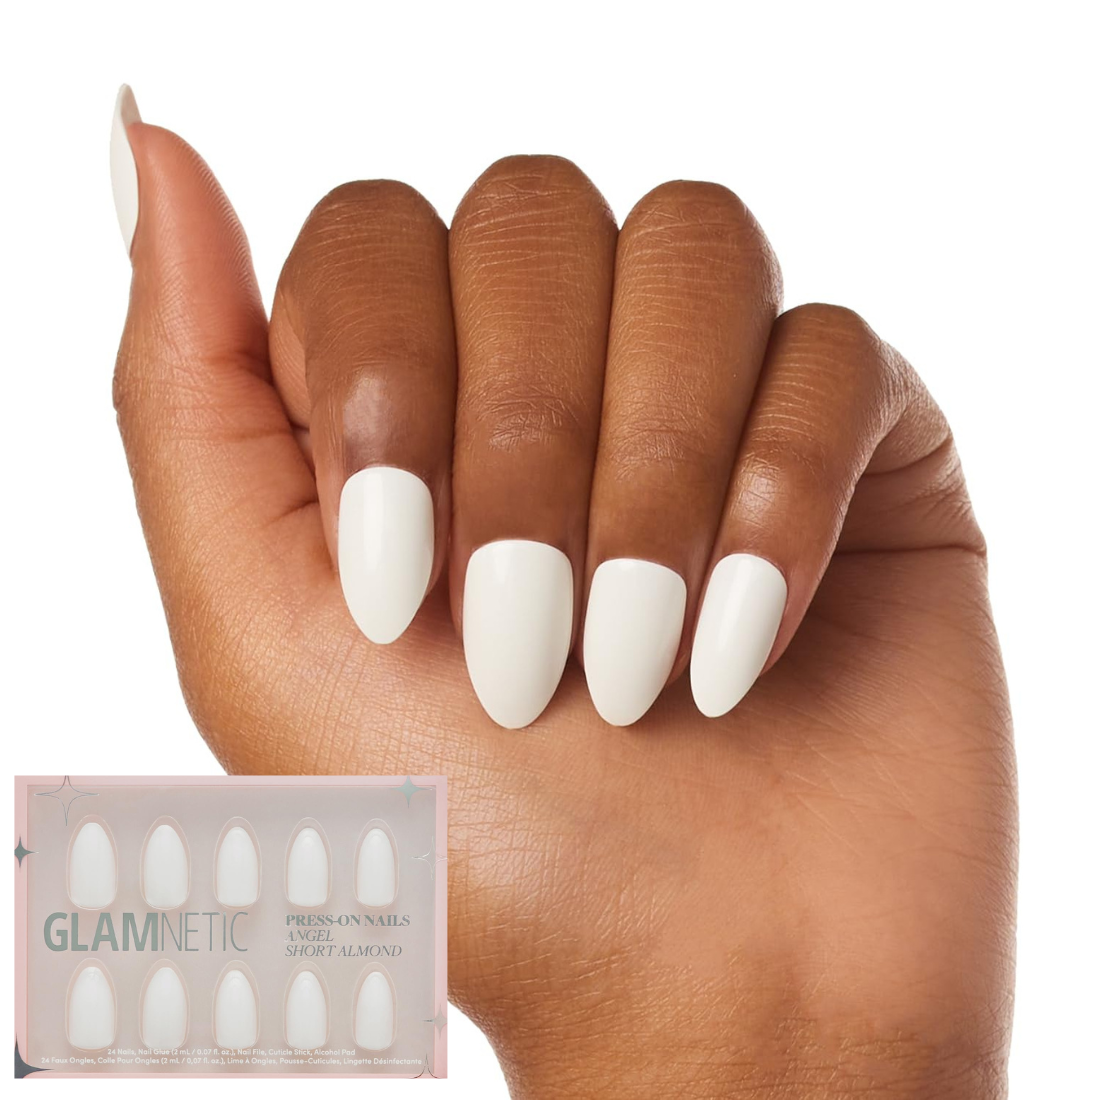 Top 5 White Fake Nails: The Ultimate Buyer's Guide